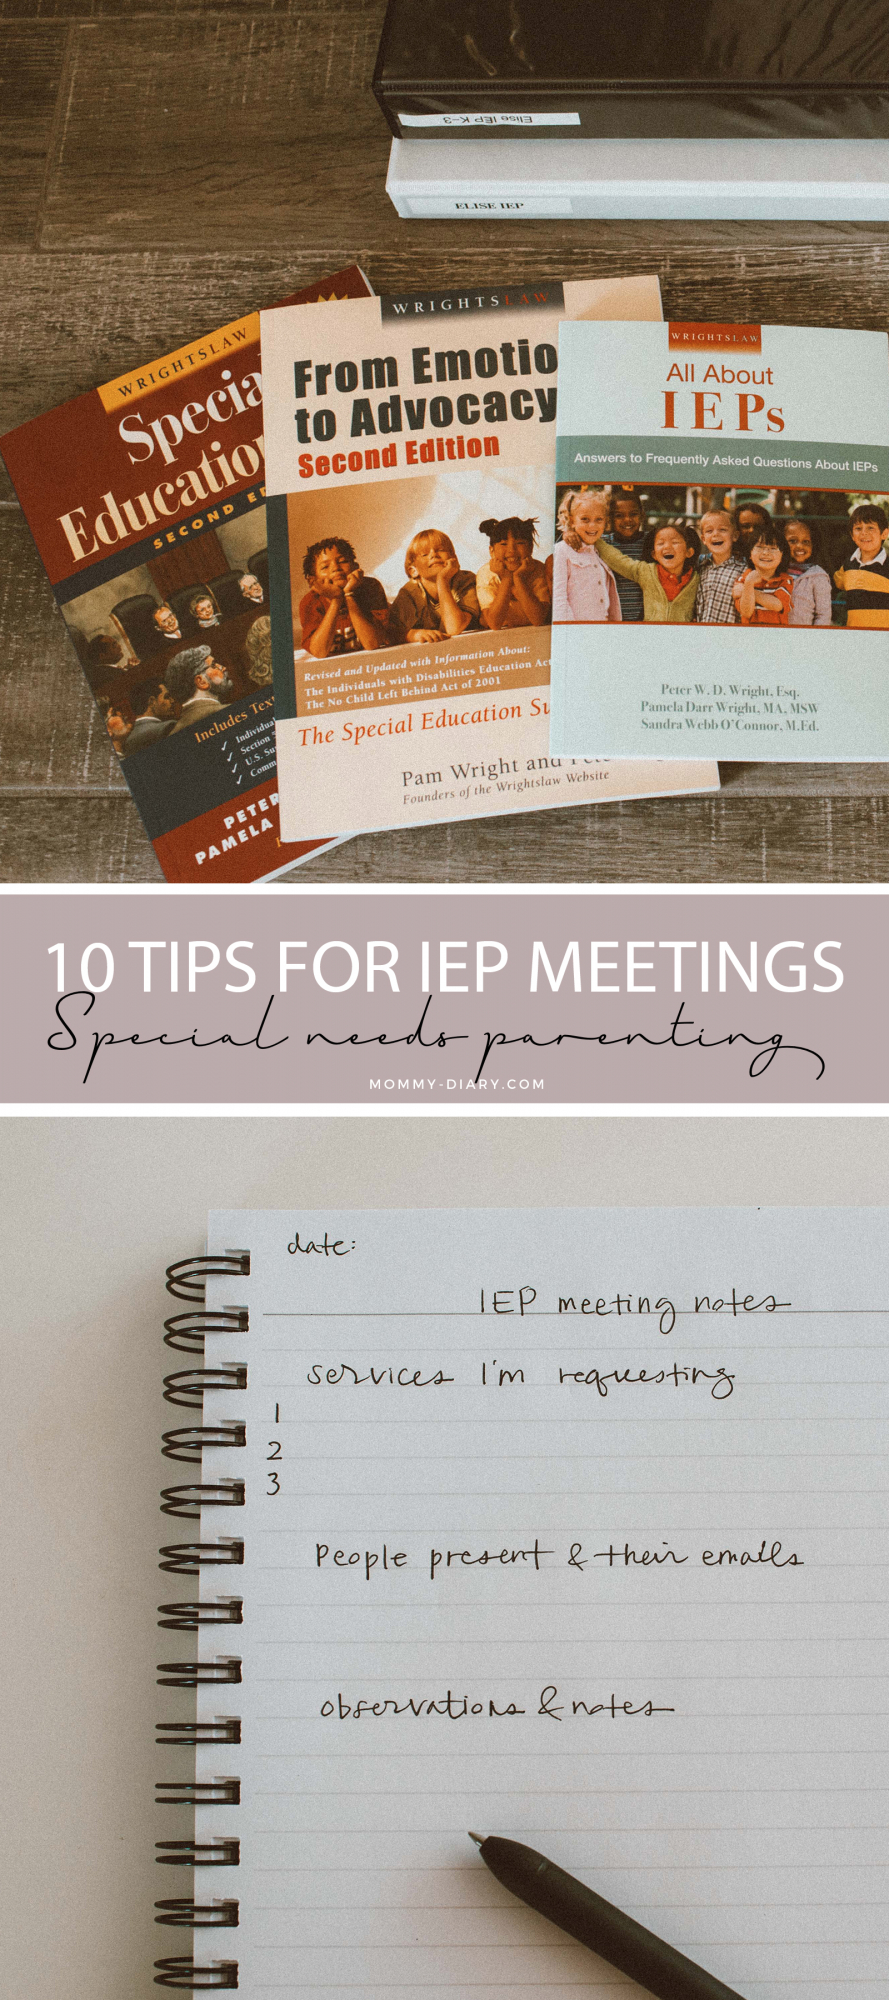 10 Tips On IEP Meetings For Special Education Parents